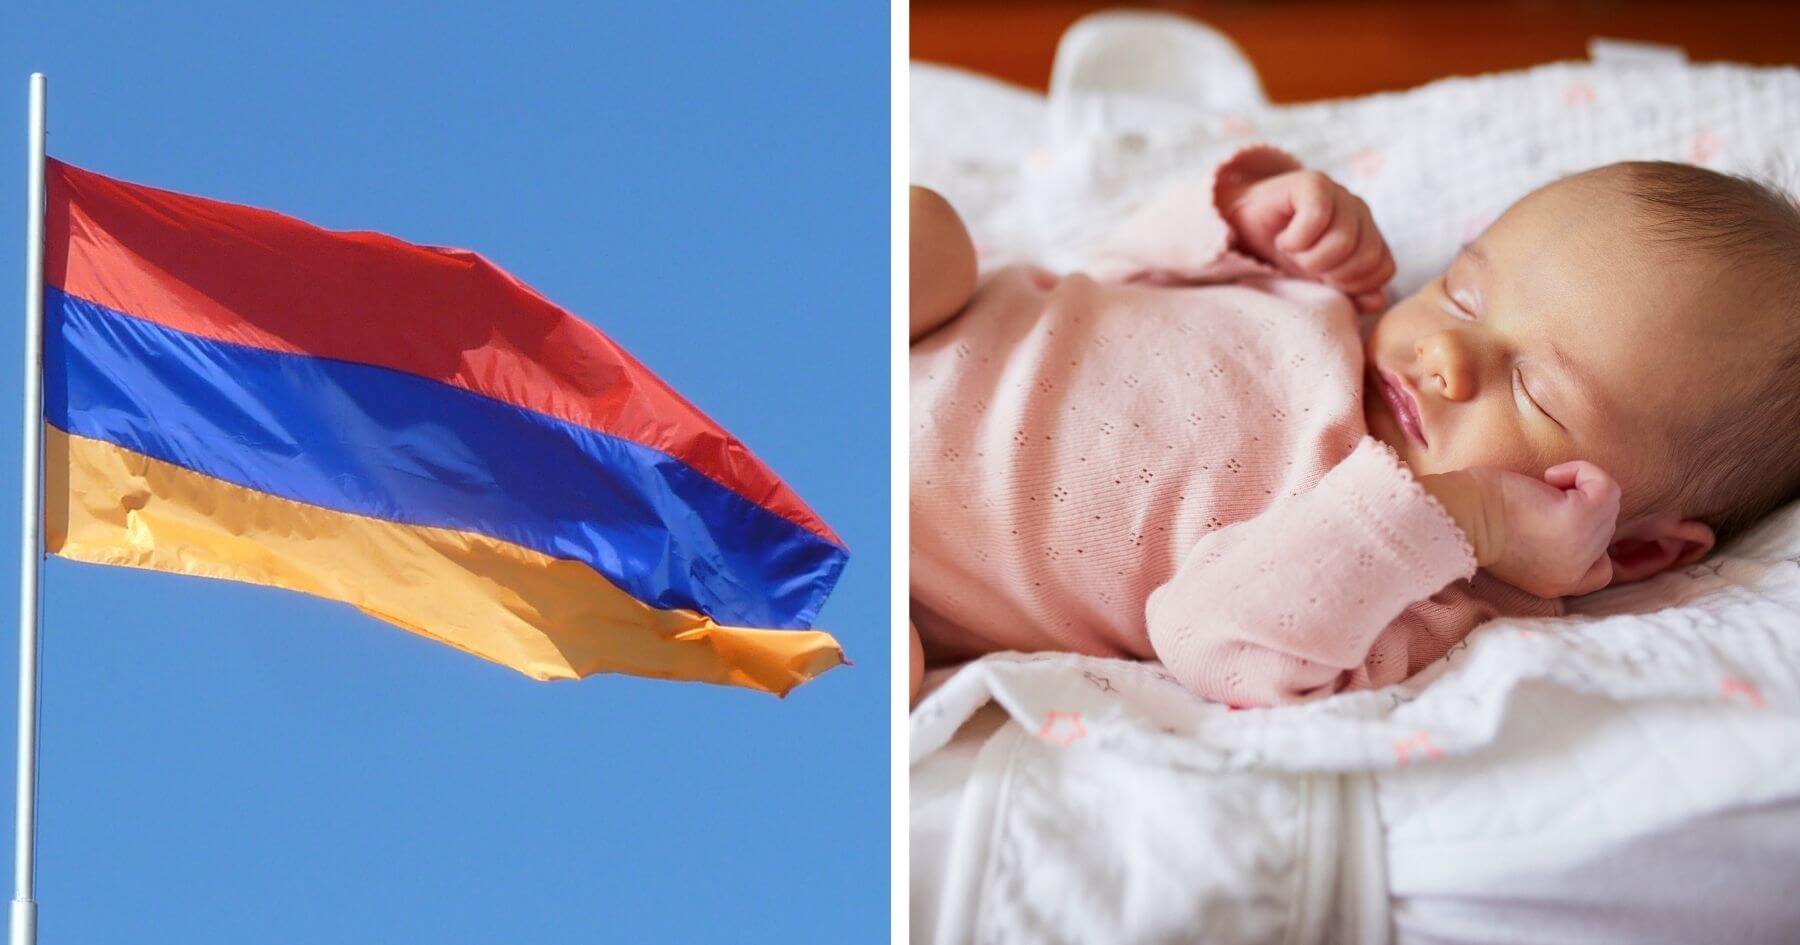 Armenia’s population could decline by 80,000 due to sex-selective abortions